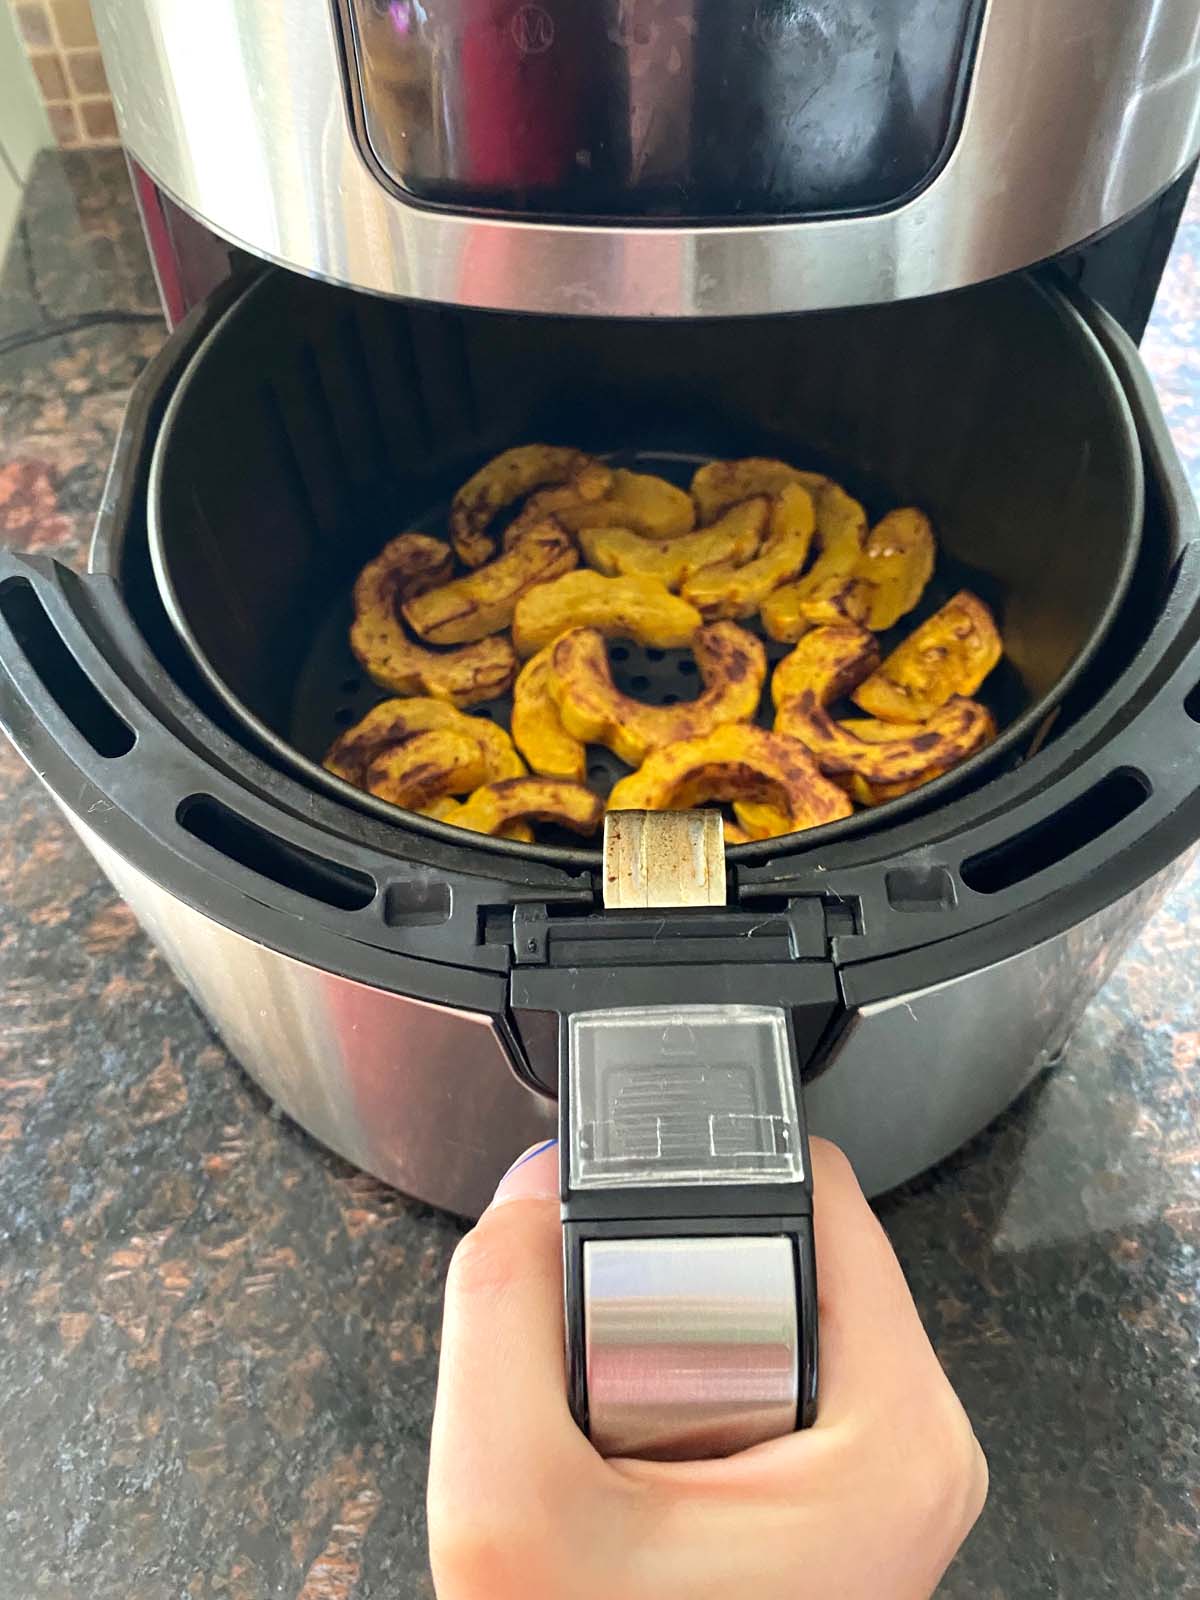 Cooked delicata squash in an air fryer.